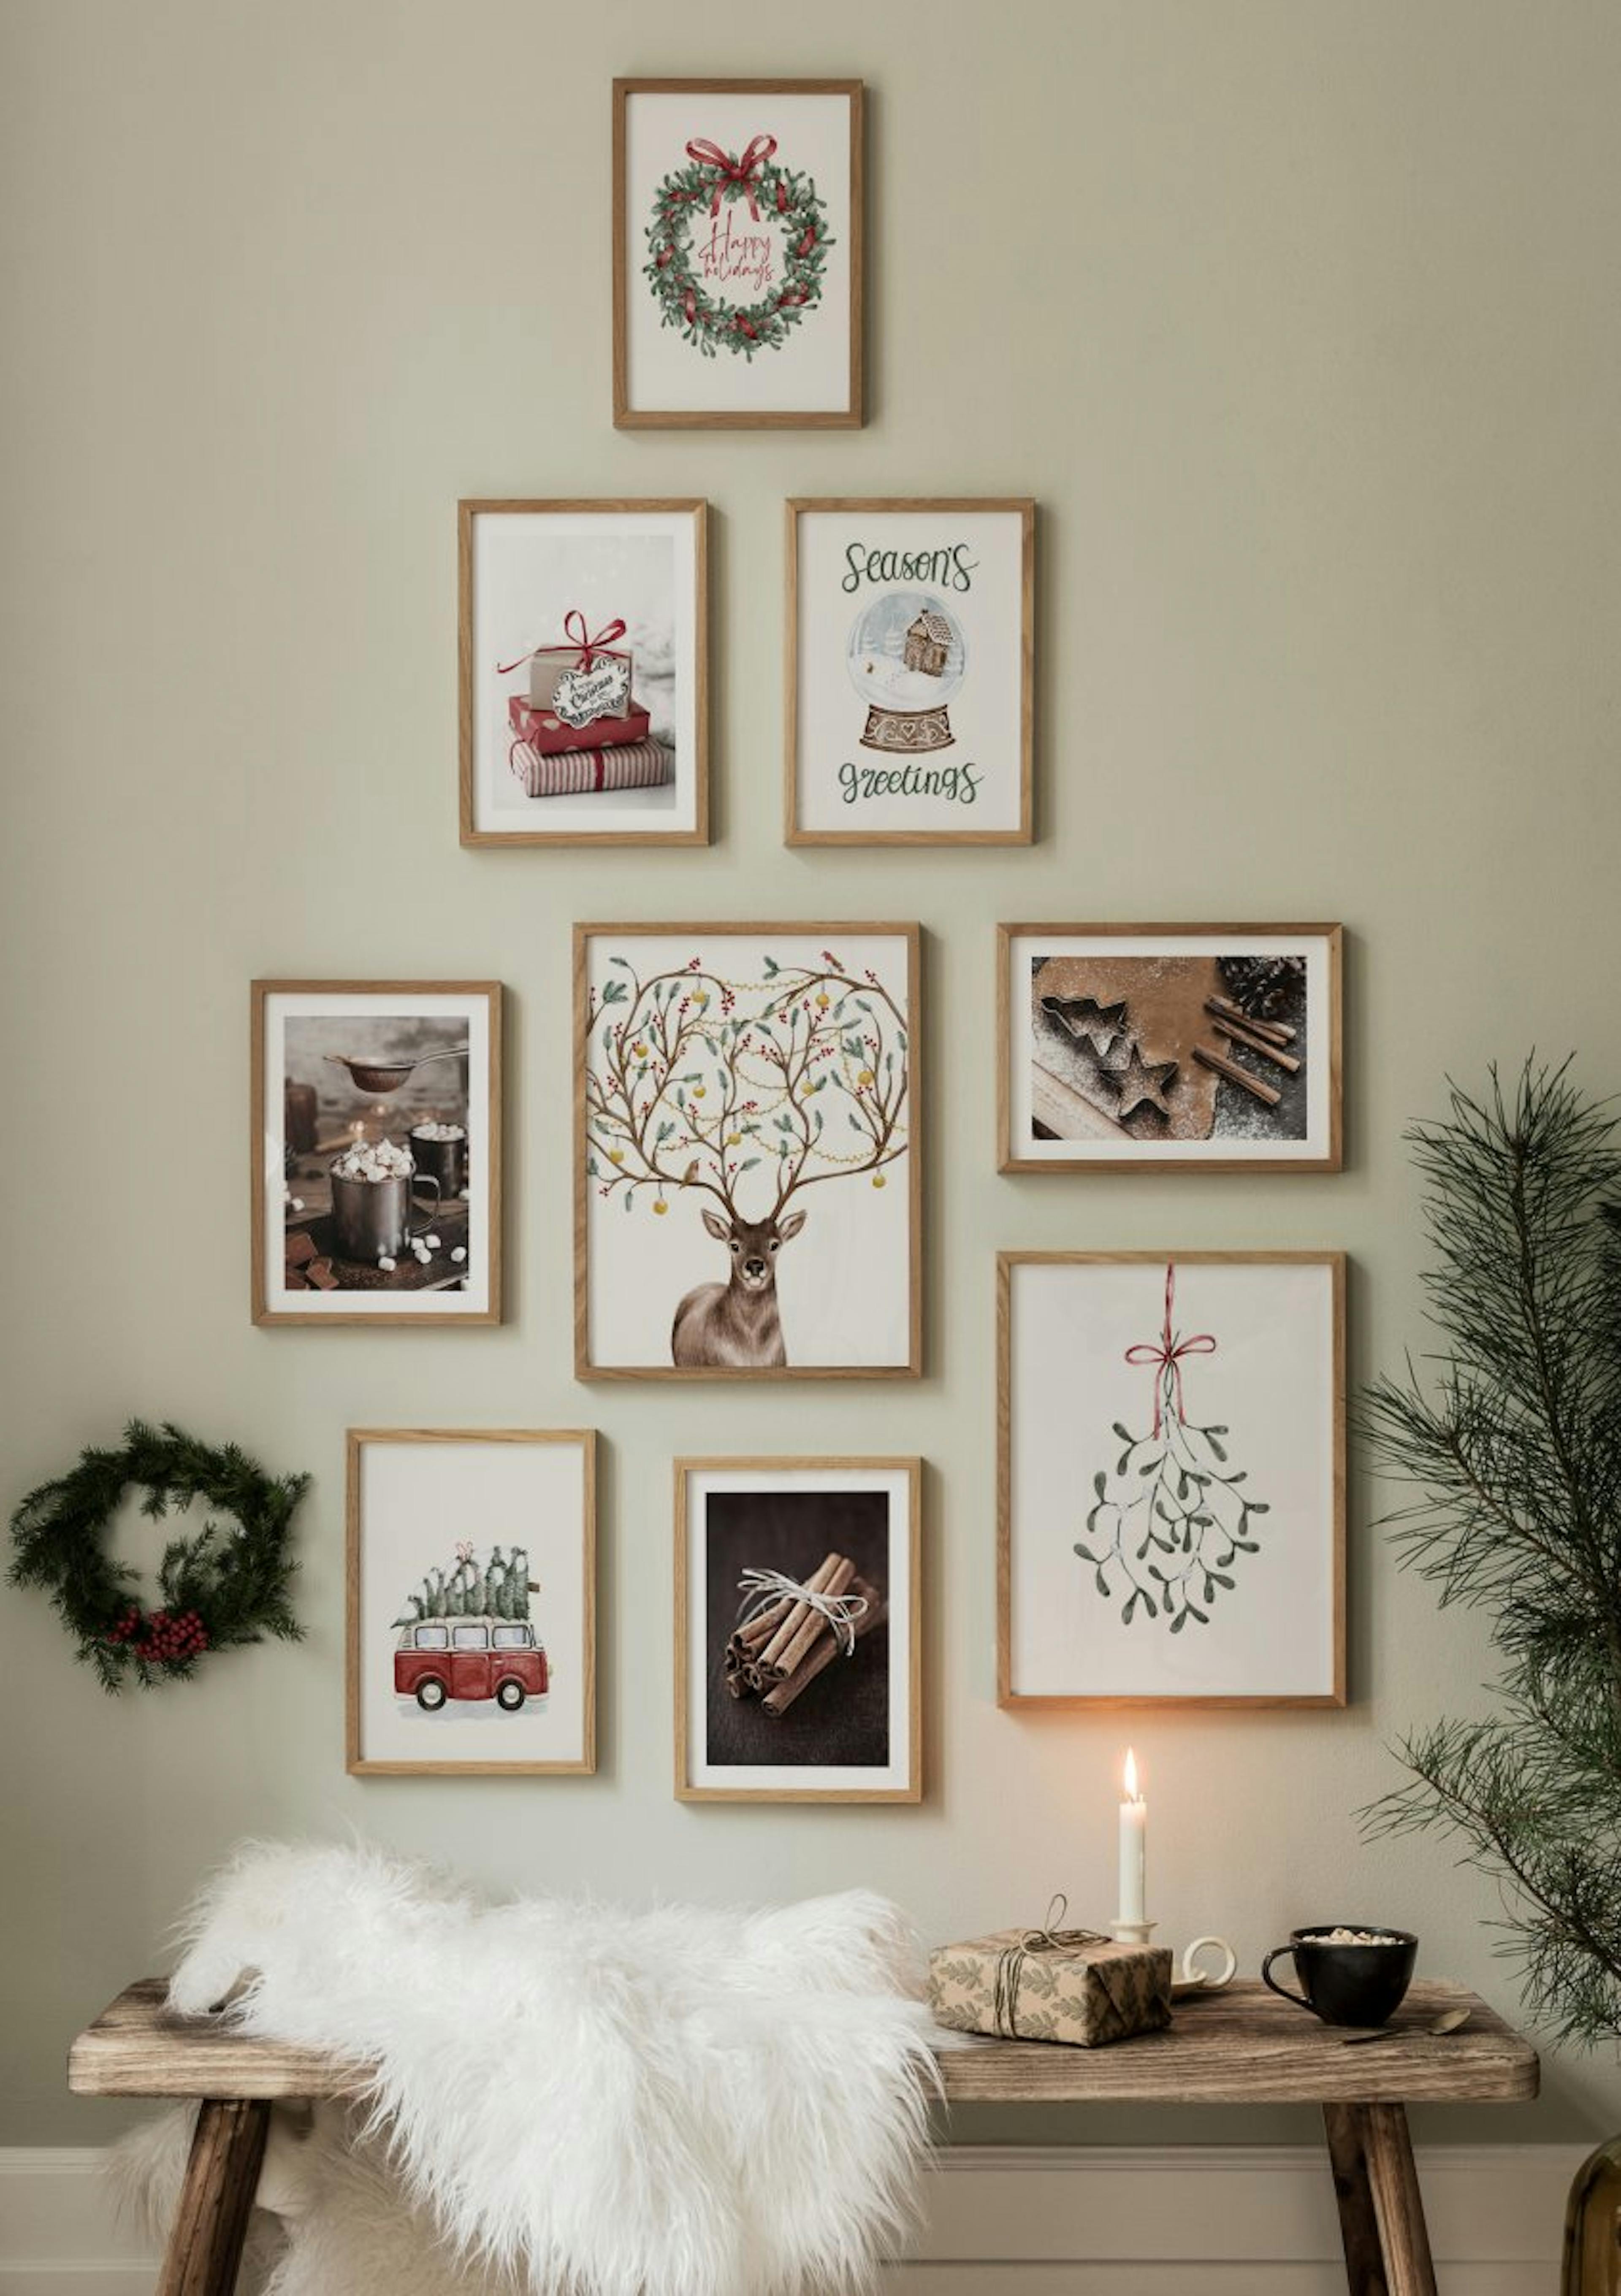 Decorated Deer Poster thumbnail